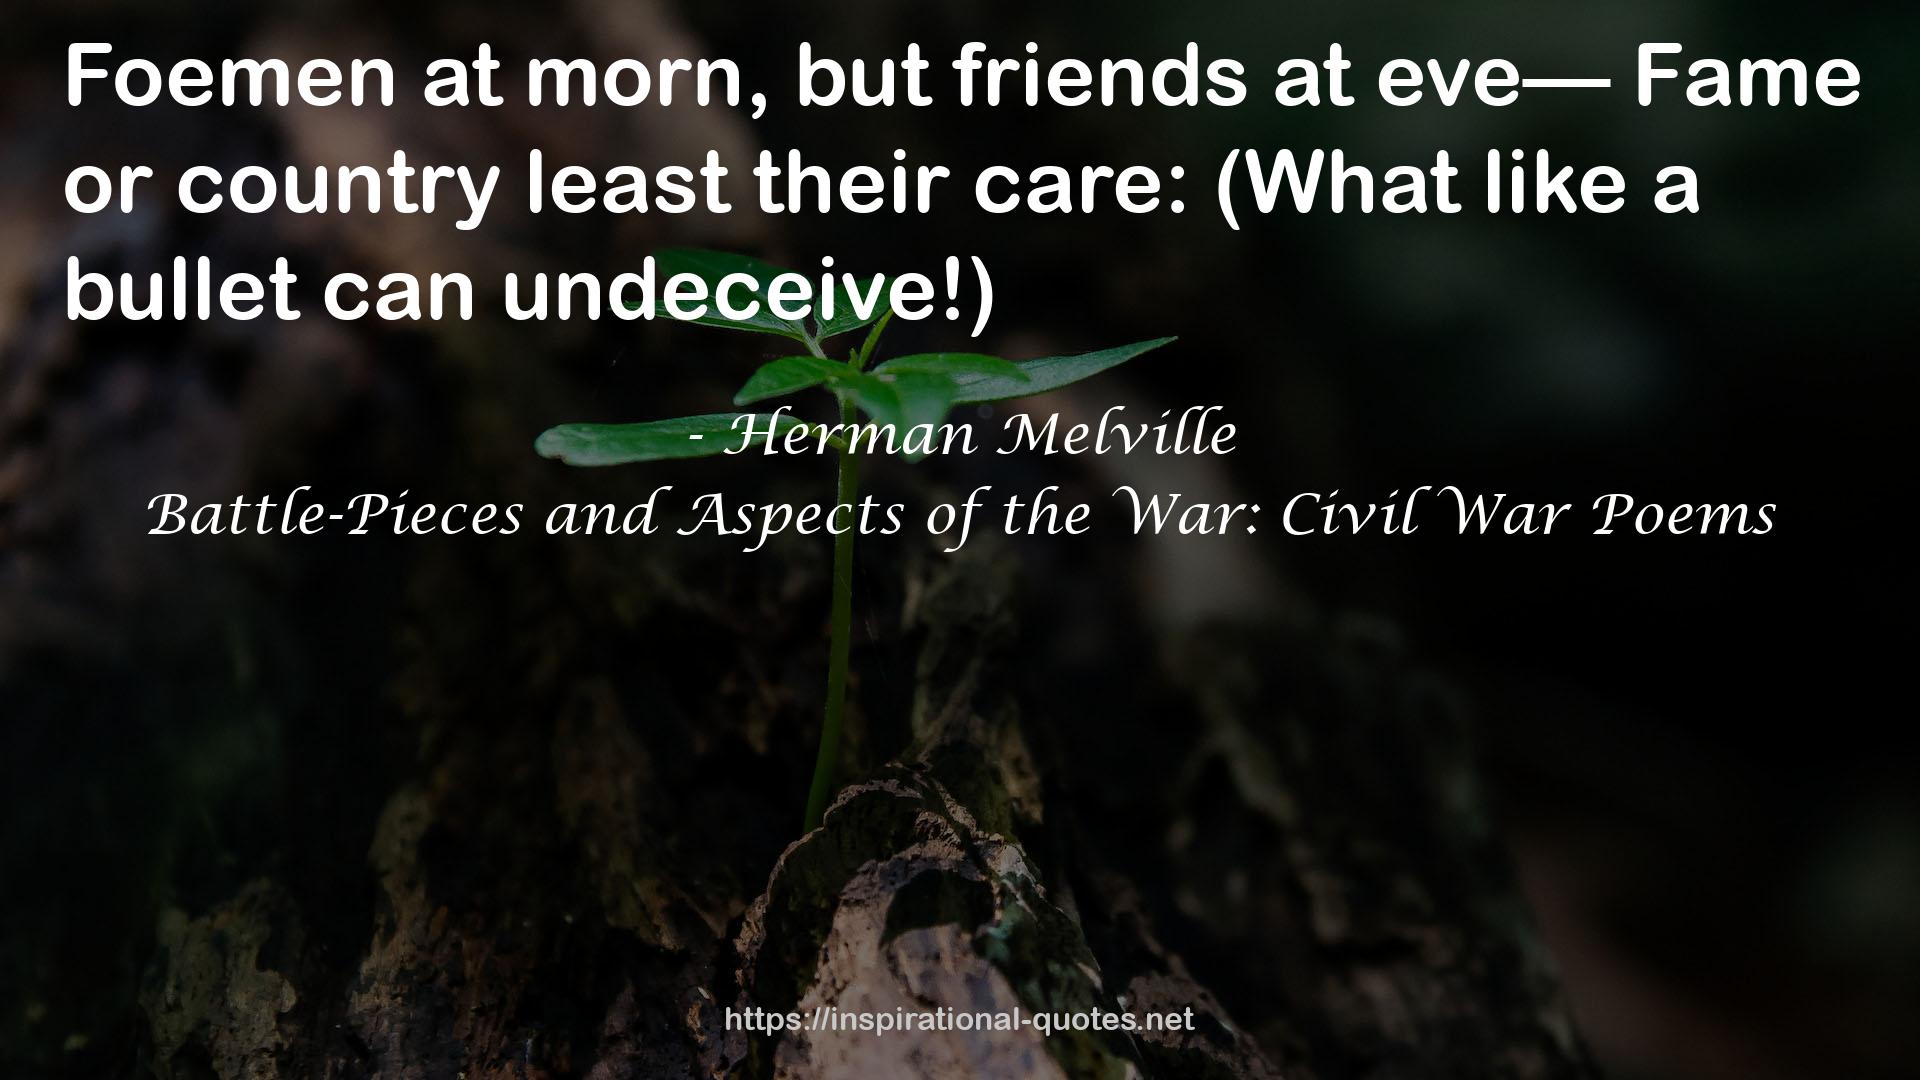 Battle-Pieces and Aspects of the War: Civil War Poems QUOTES